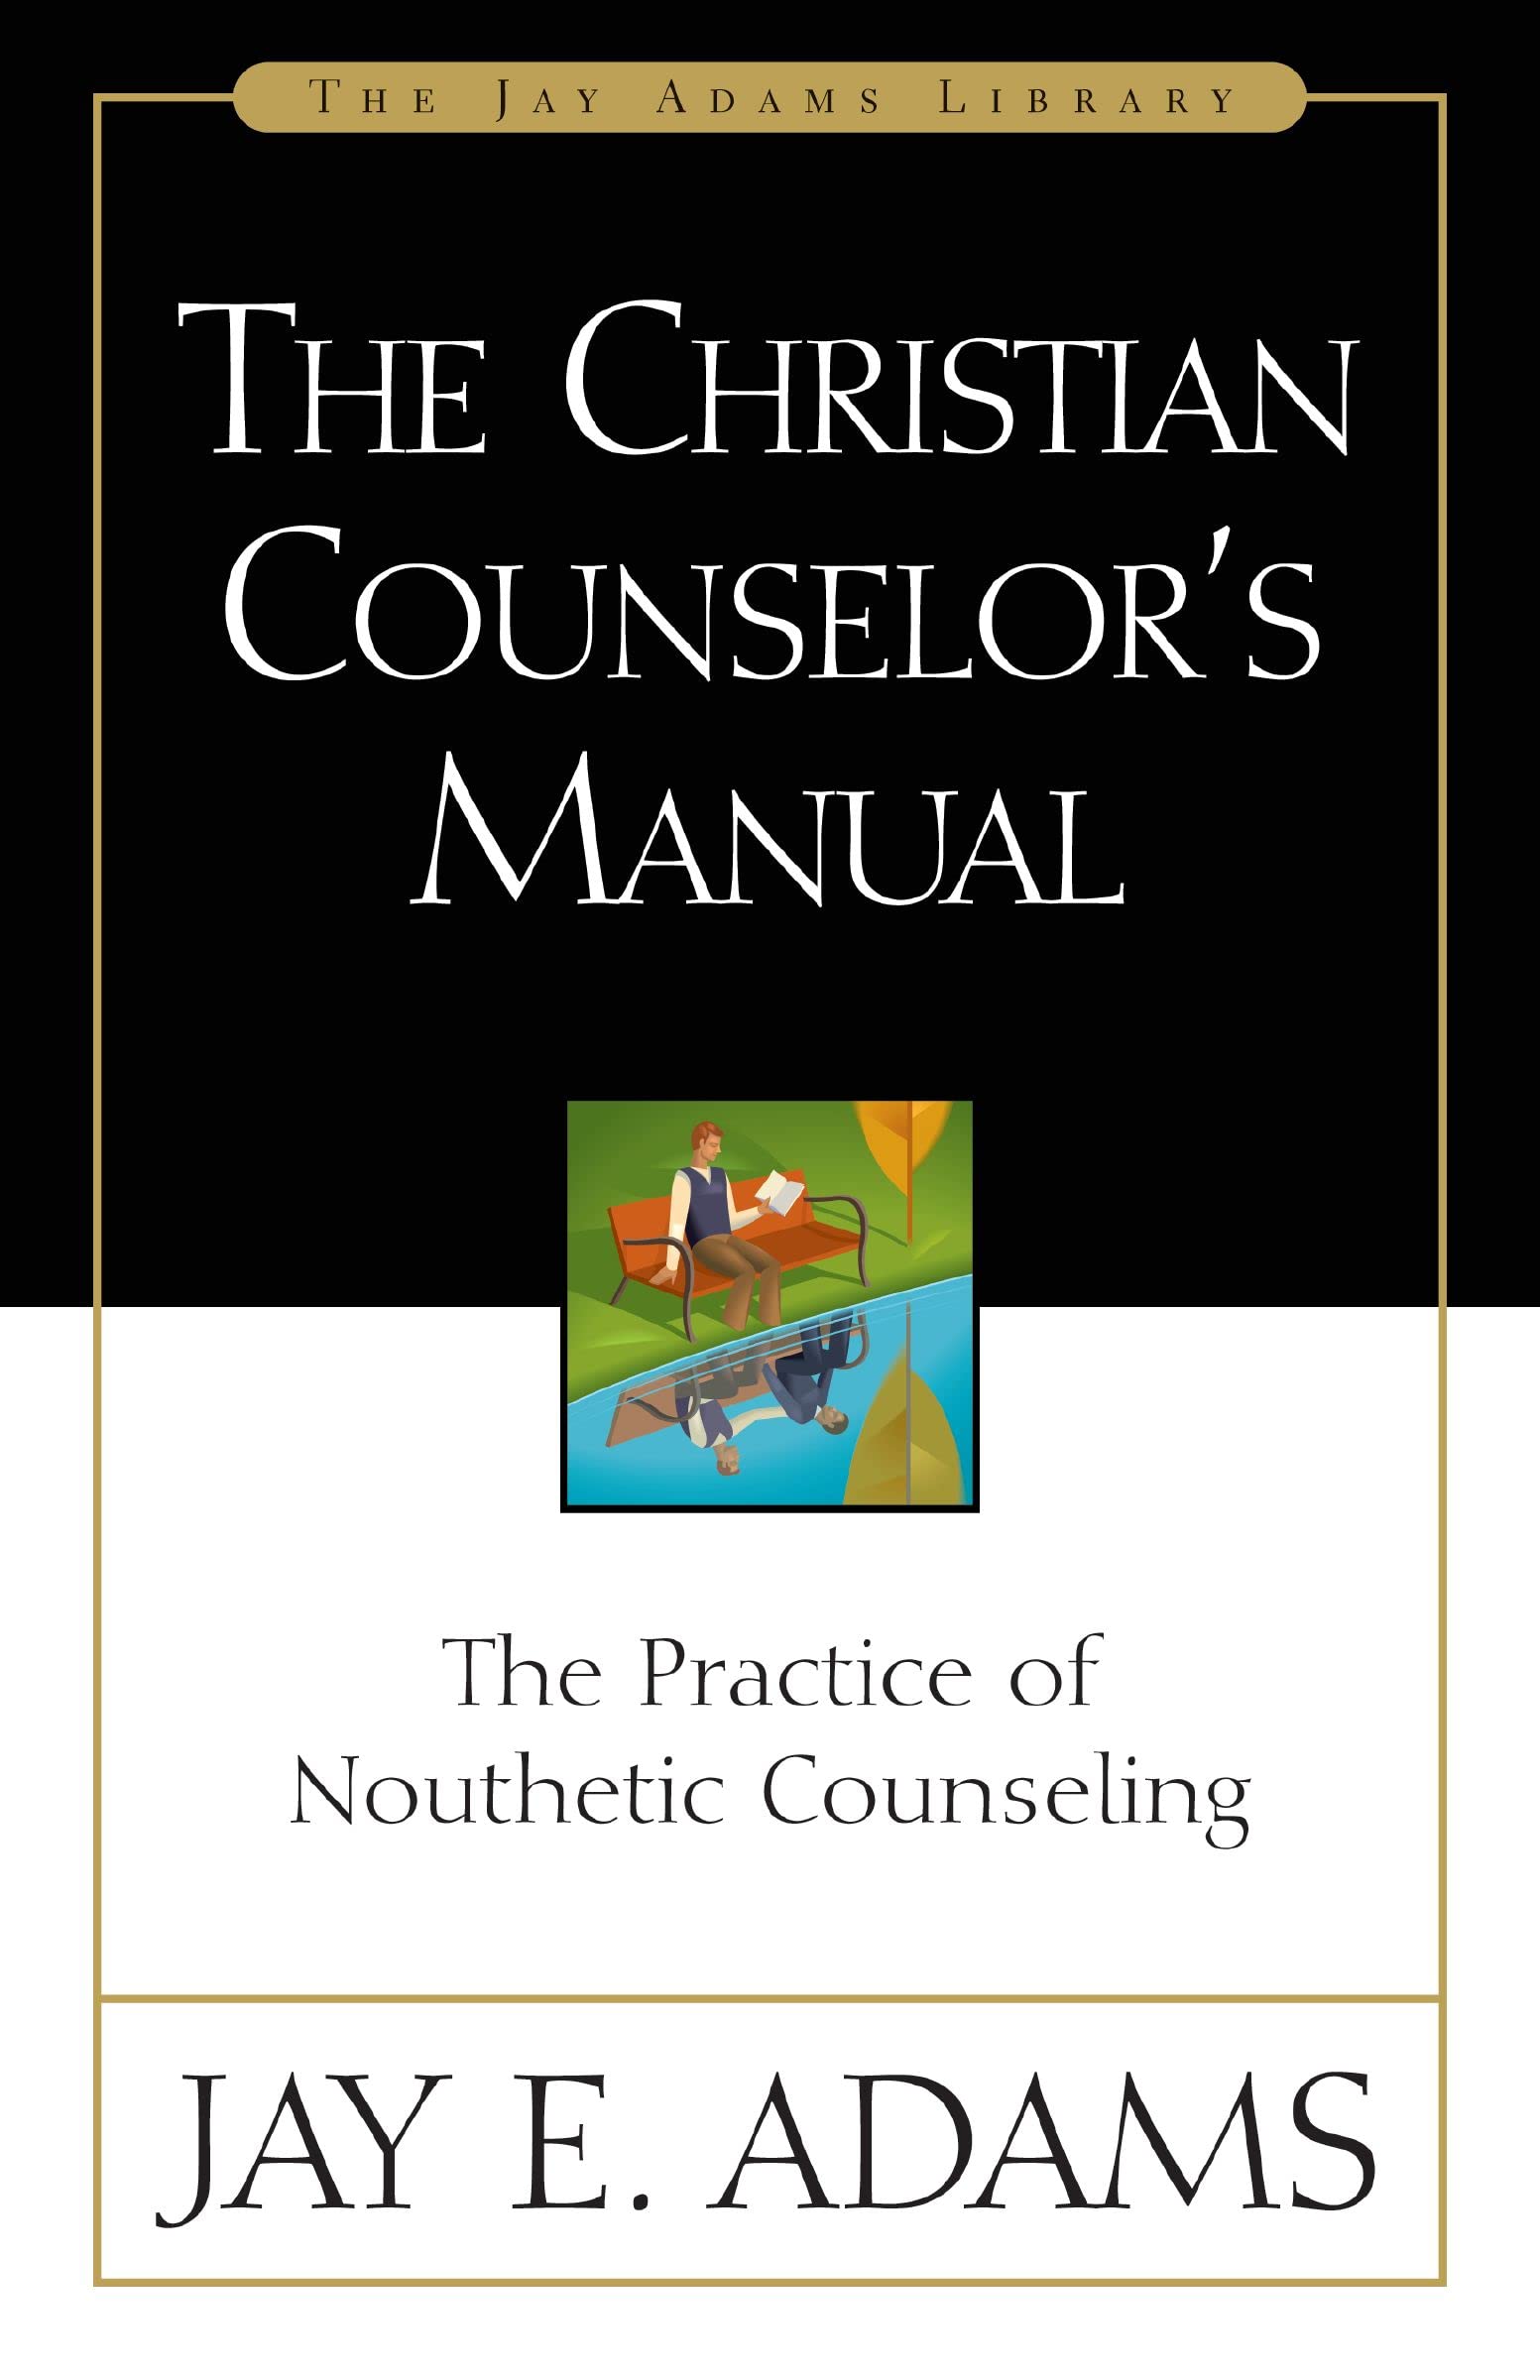 The Christian Counselor's Manual: The Practice of Nouthetic Counseling (Jay Adams Library)